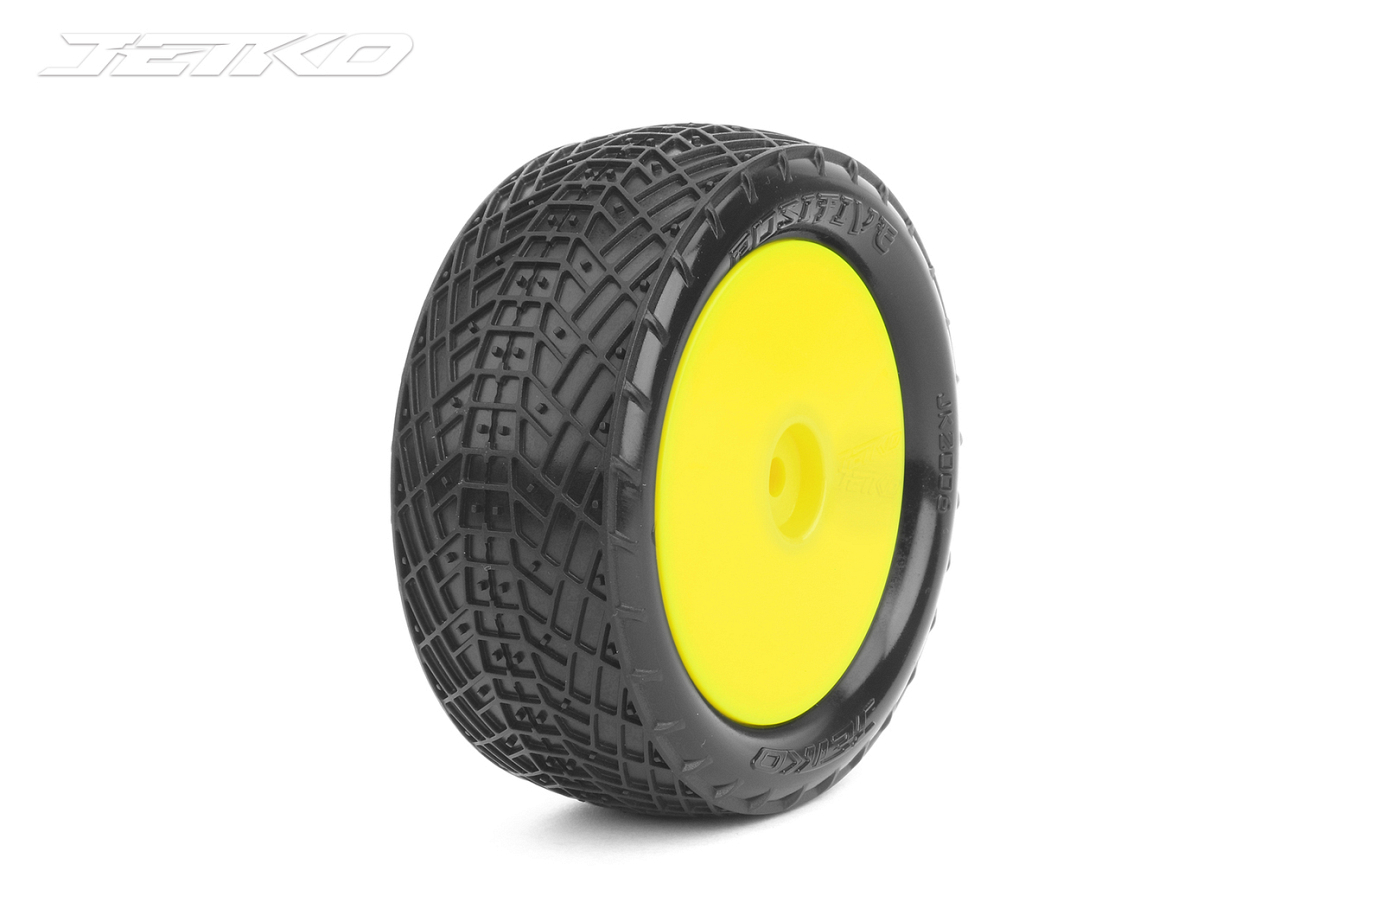 Jetko 1/10 Buggy 4WD Front-POSITIVE/Dish/Yellow Rim/Super Soft [2006DYSSG]